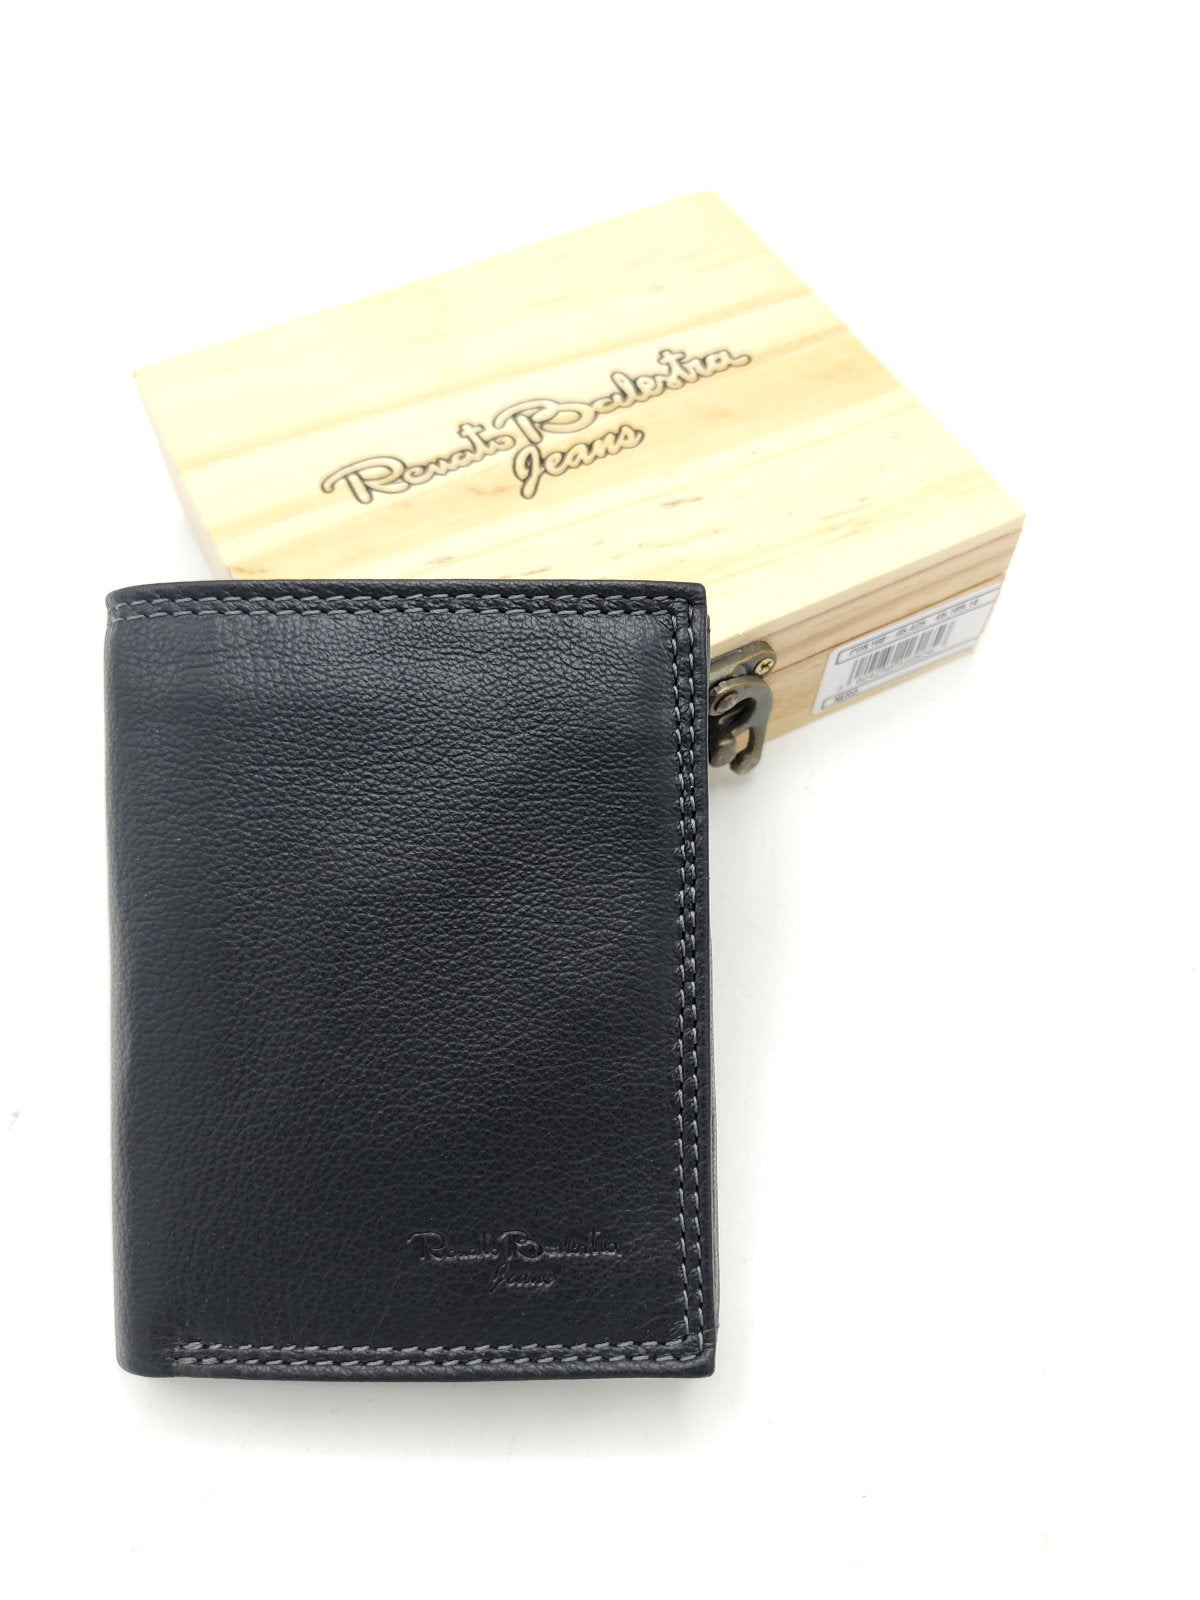 Genuine leather wallet for Men, Brand Renato Balestra Jeans, with wooden box, art. PDK160-65.425